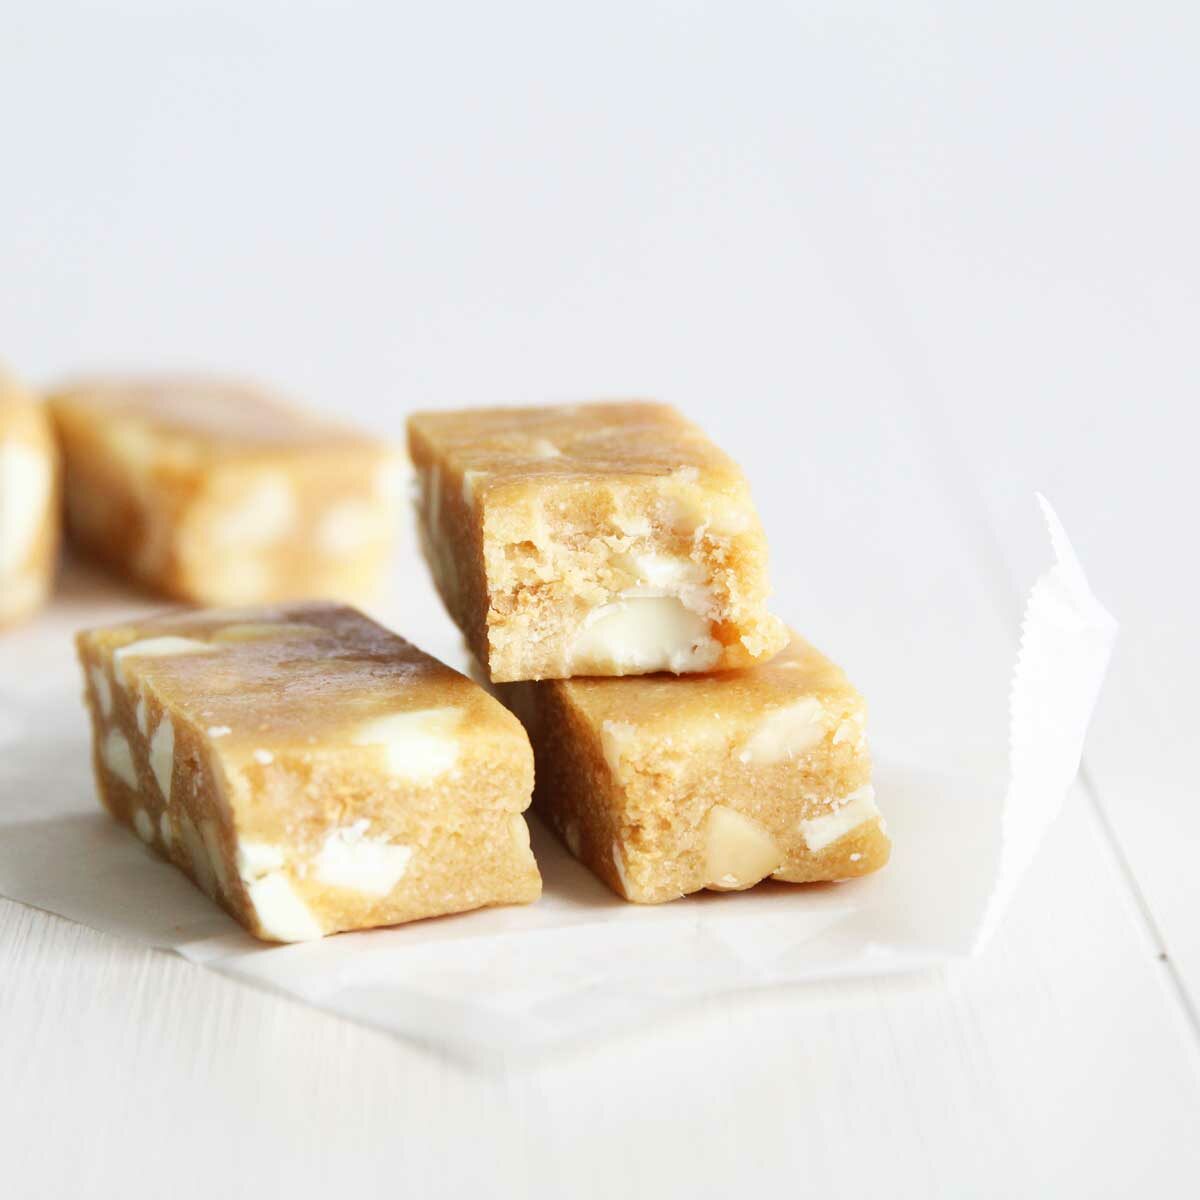 Chunky White Chocolate Macadamia Protein Bars Recipe (made with Collagen Peptides) - White Chocolate Macadamia Protein Bars